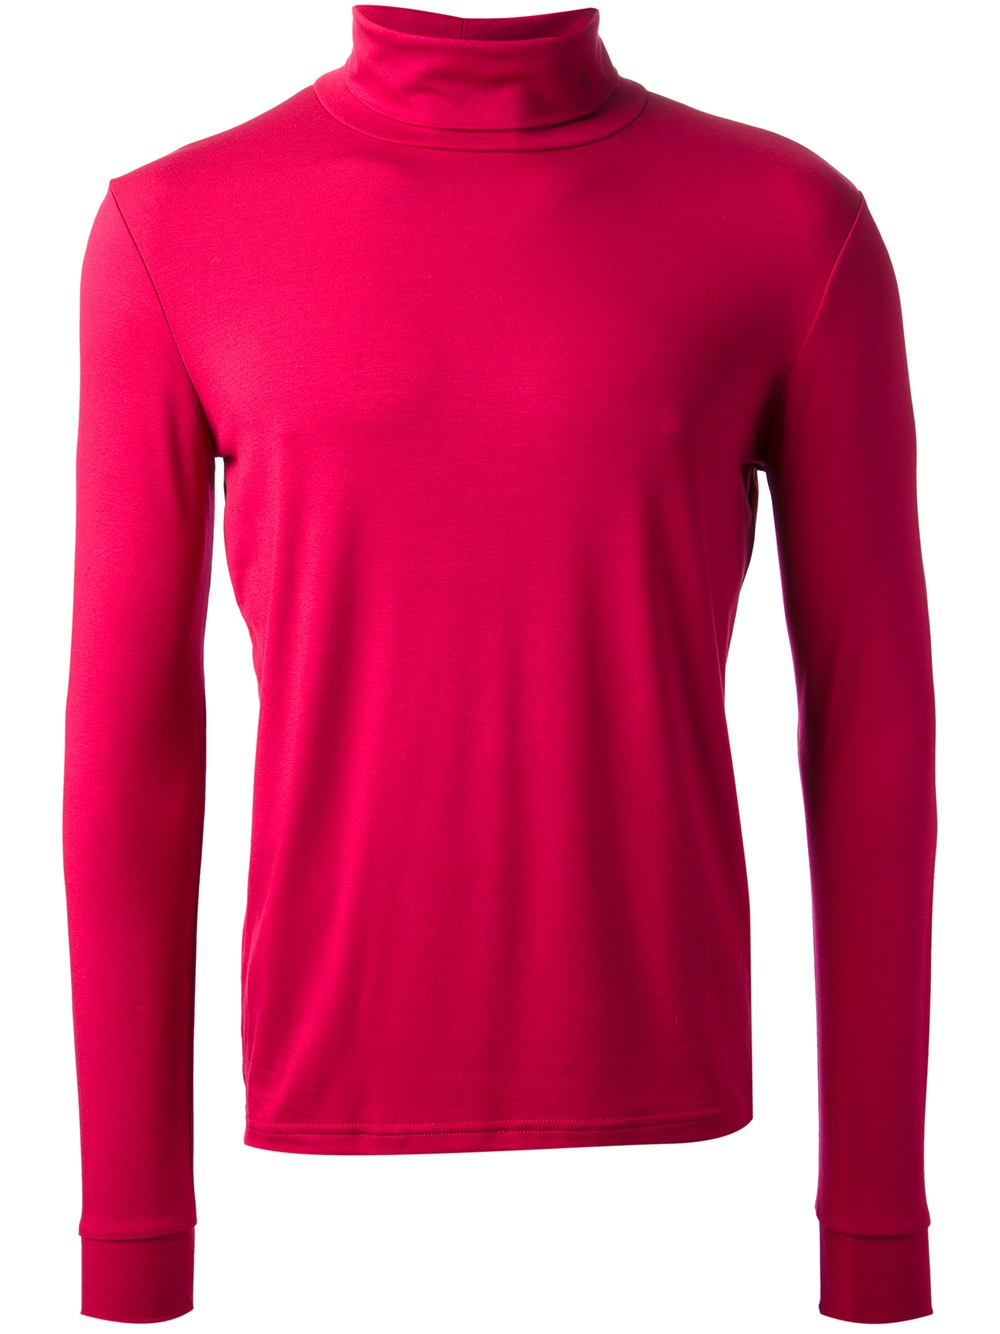 Lyst - Raf simons Turtleneck Top in Red for Men